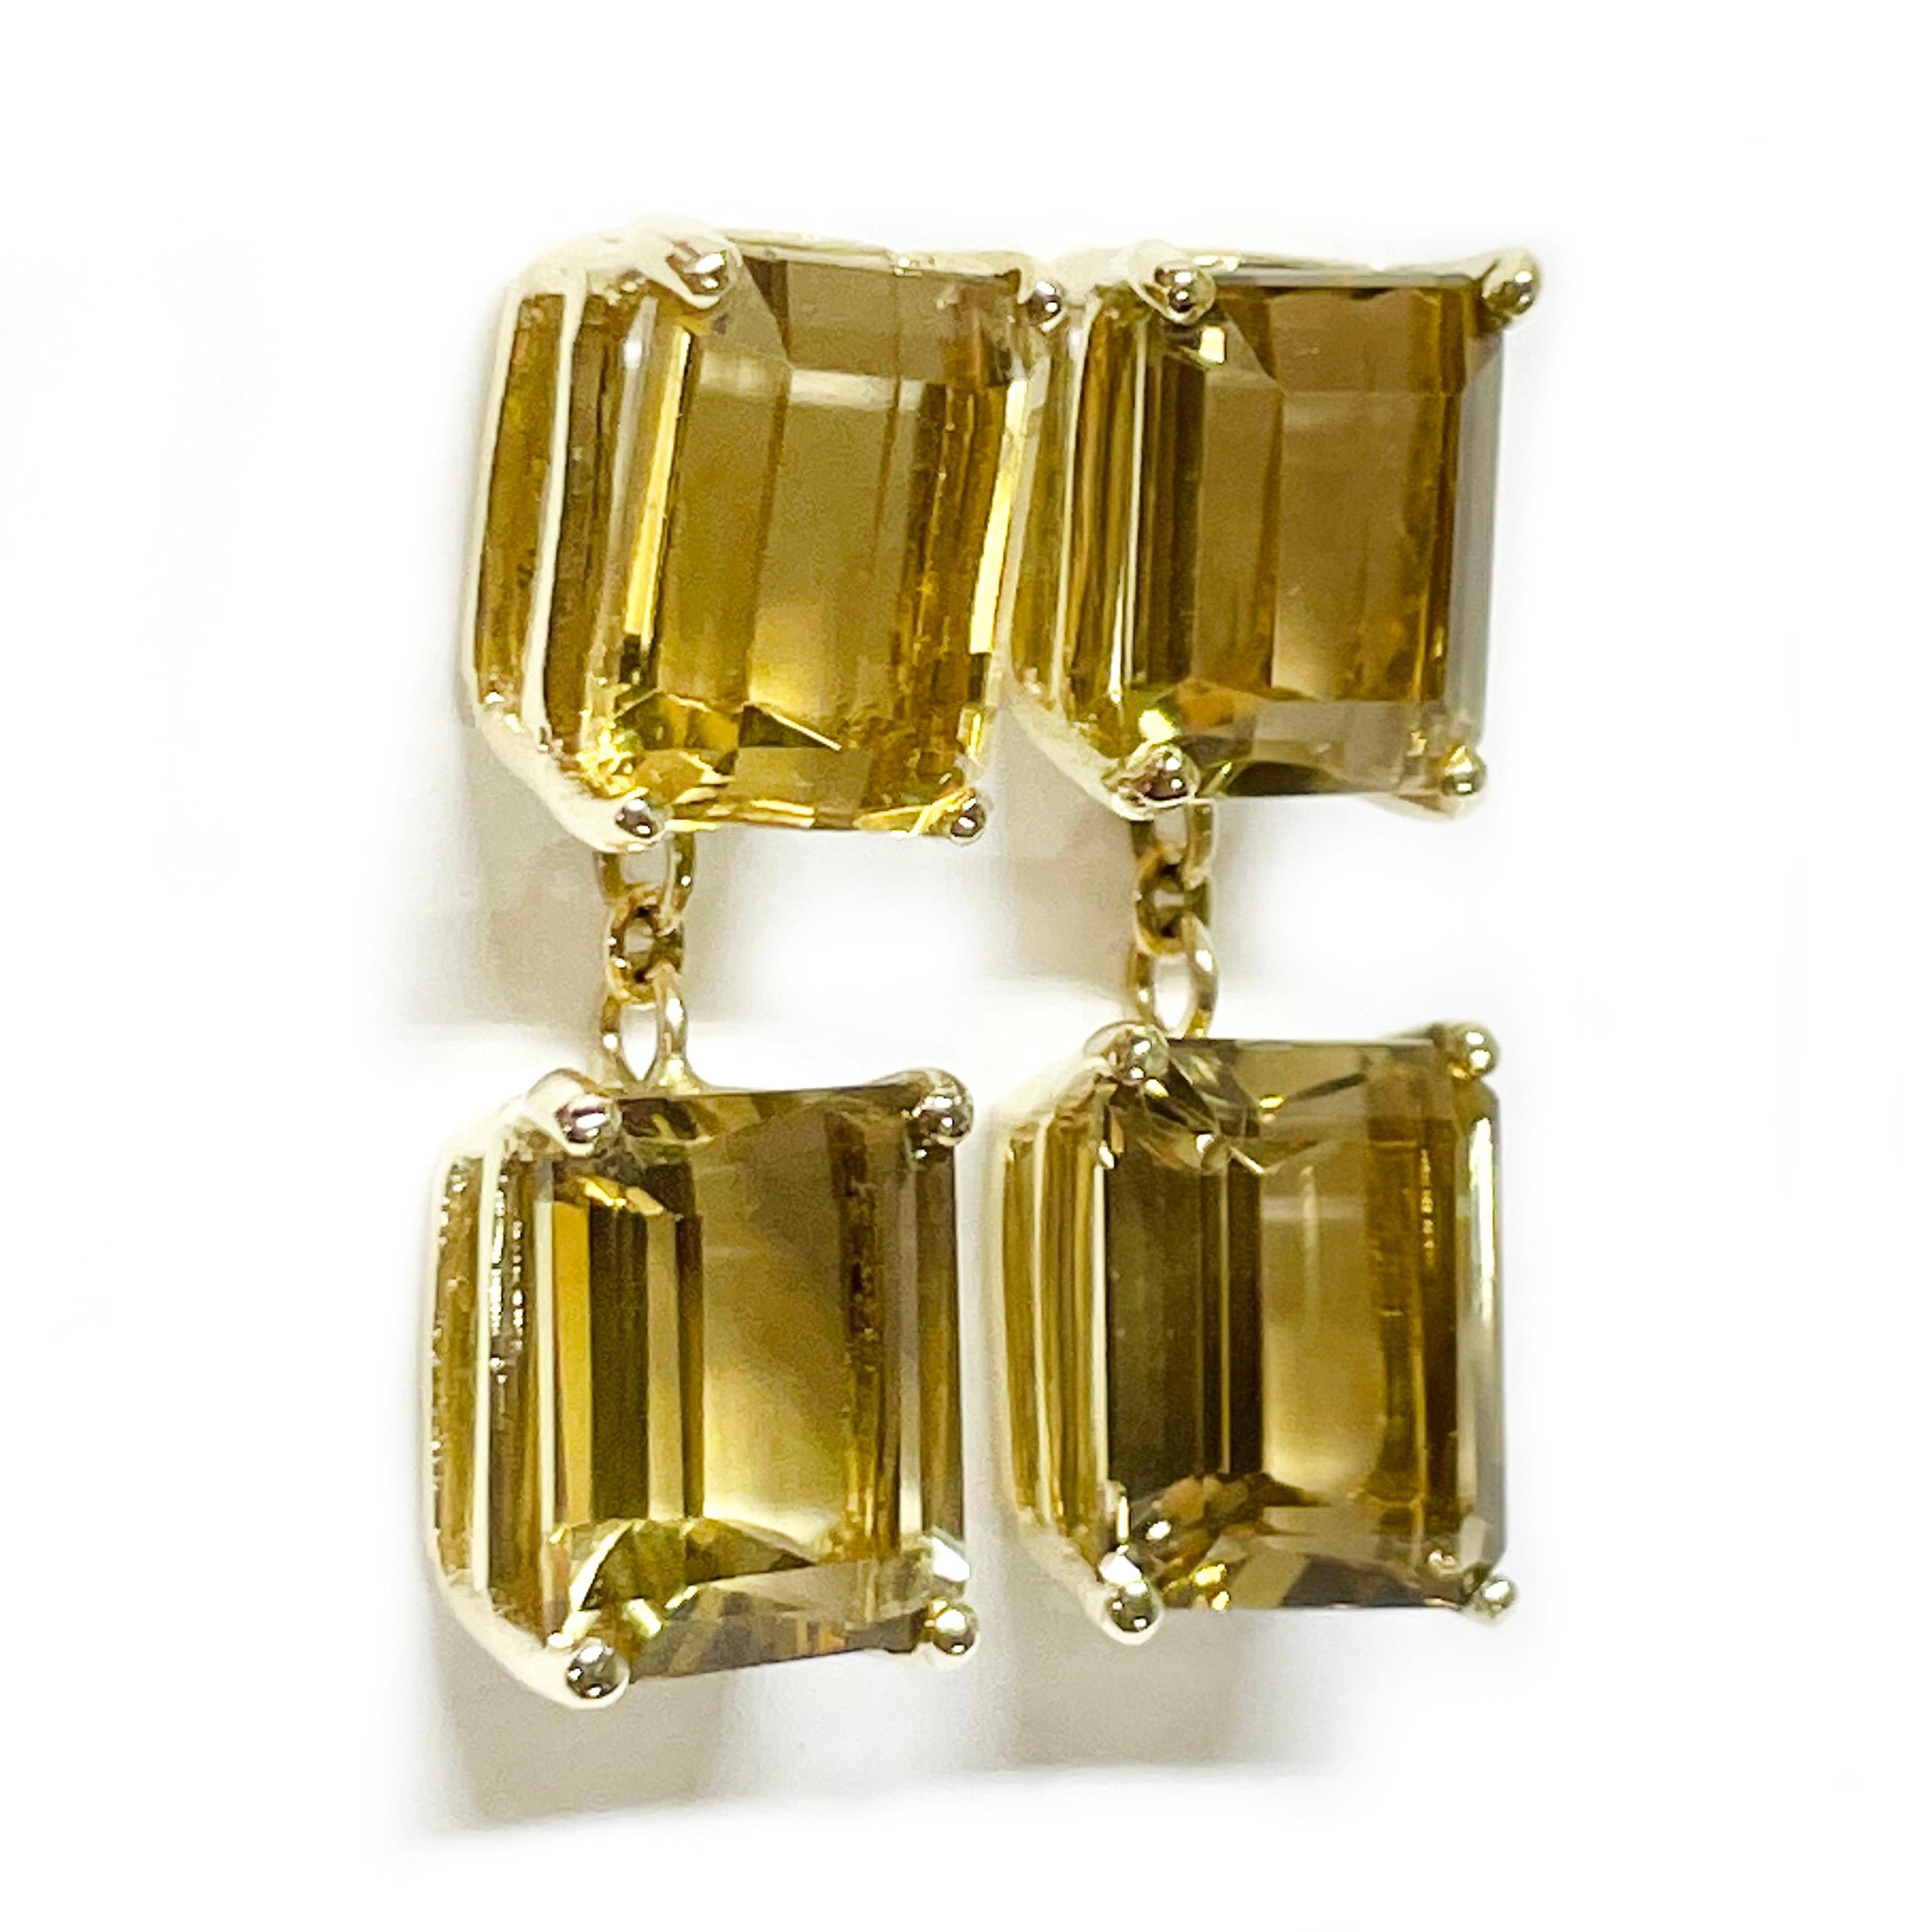 14 Karat Yellow Gold Citrine Dangle Earrings. The earrings each feature a two 9 x 7mm Citrine emerald-cut gemstones. The light gold/brown color gemstones are four-prong-set in a yellow gold basket settings. Their combined total carat weight is